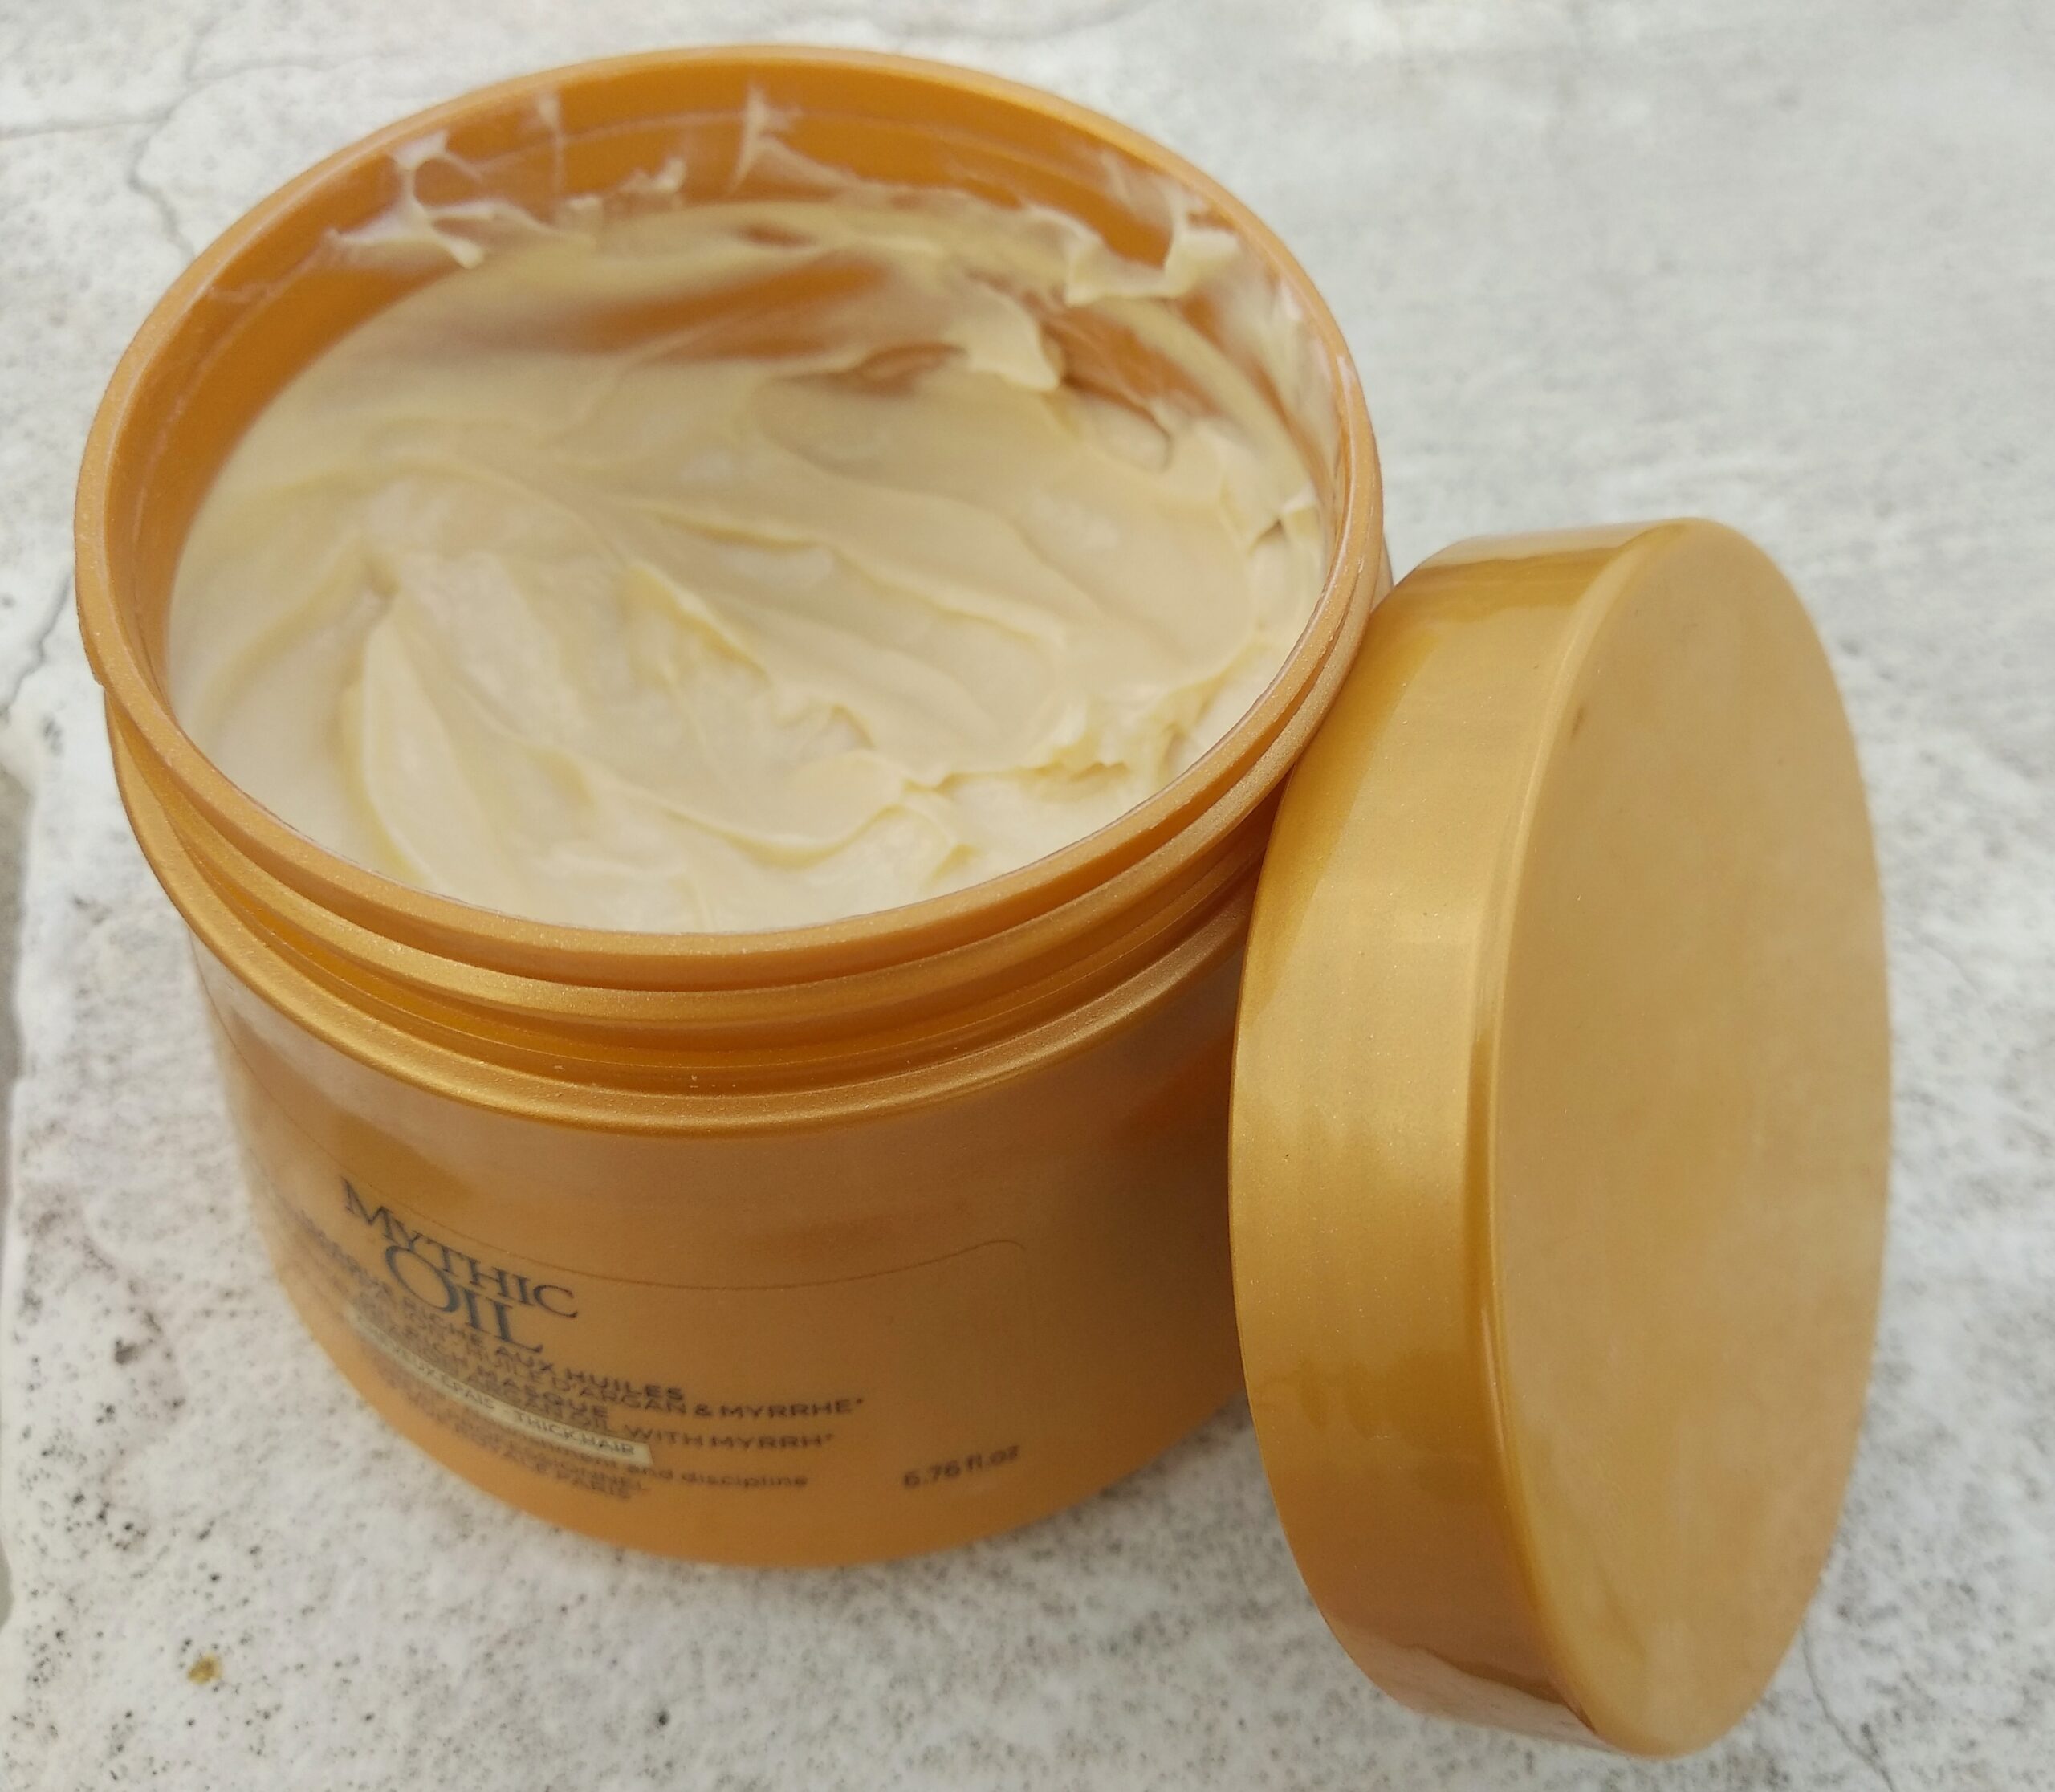 Loreal professional hair mask review